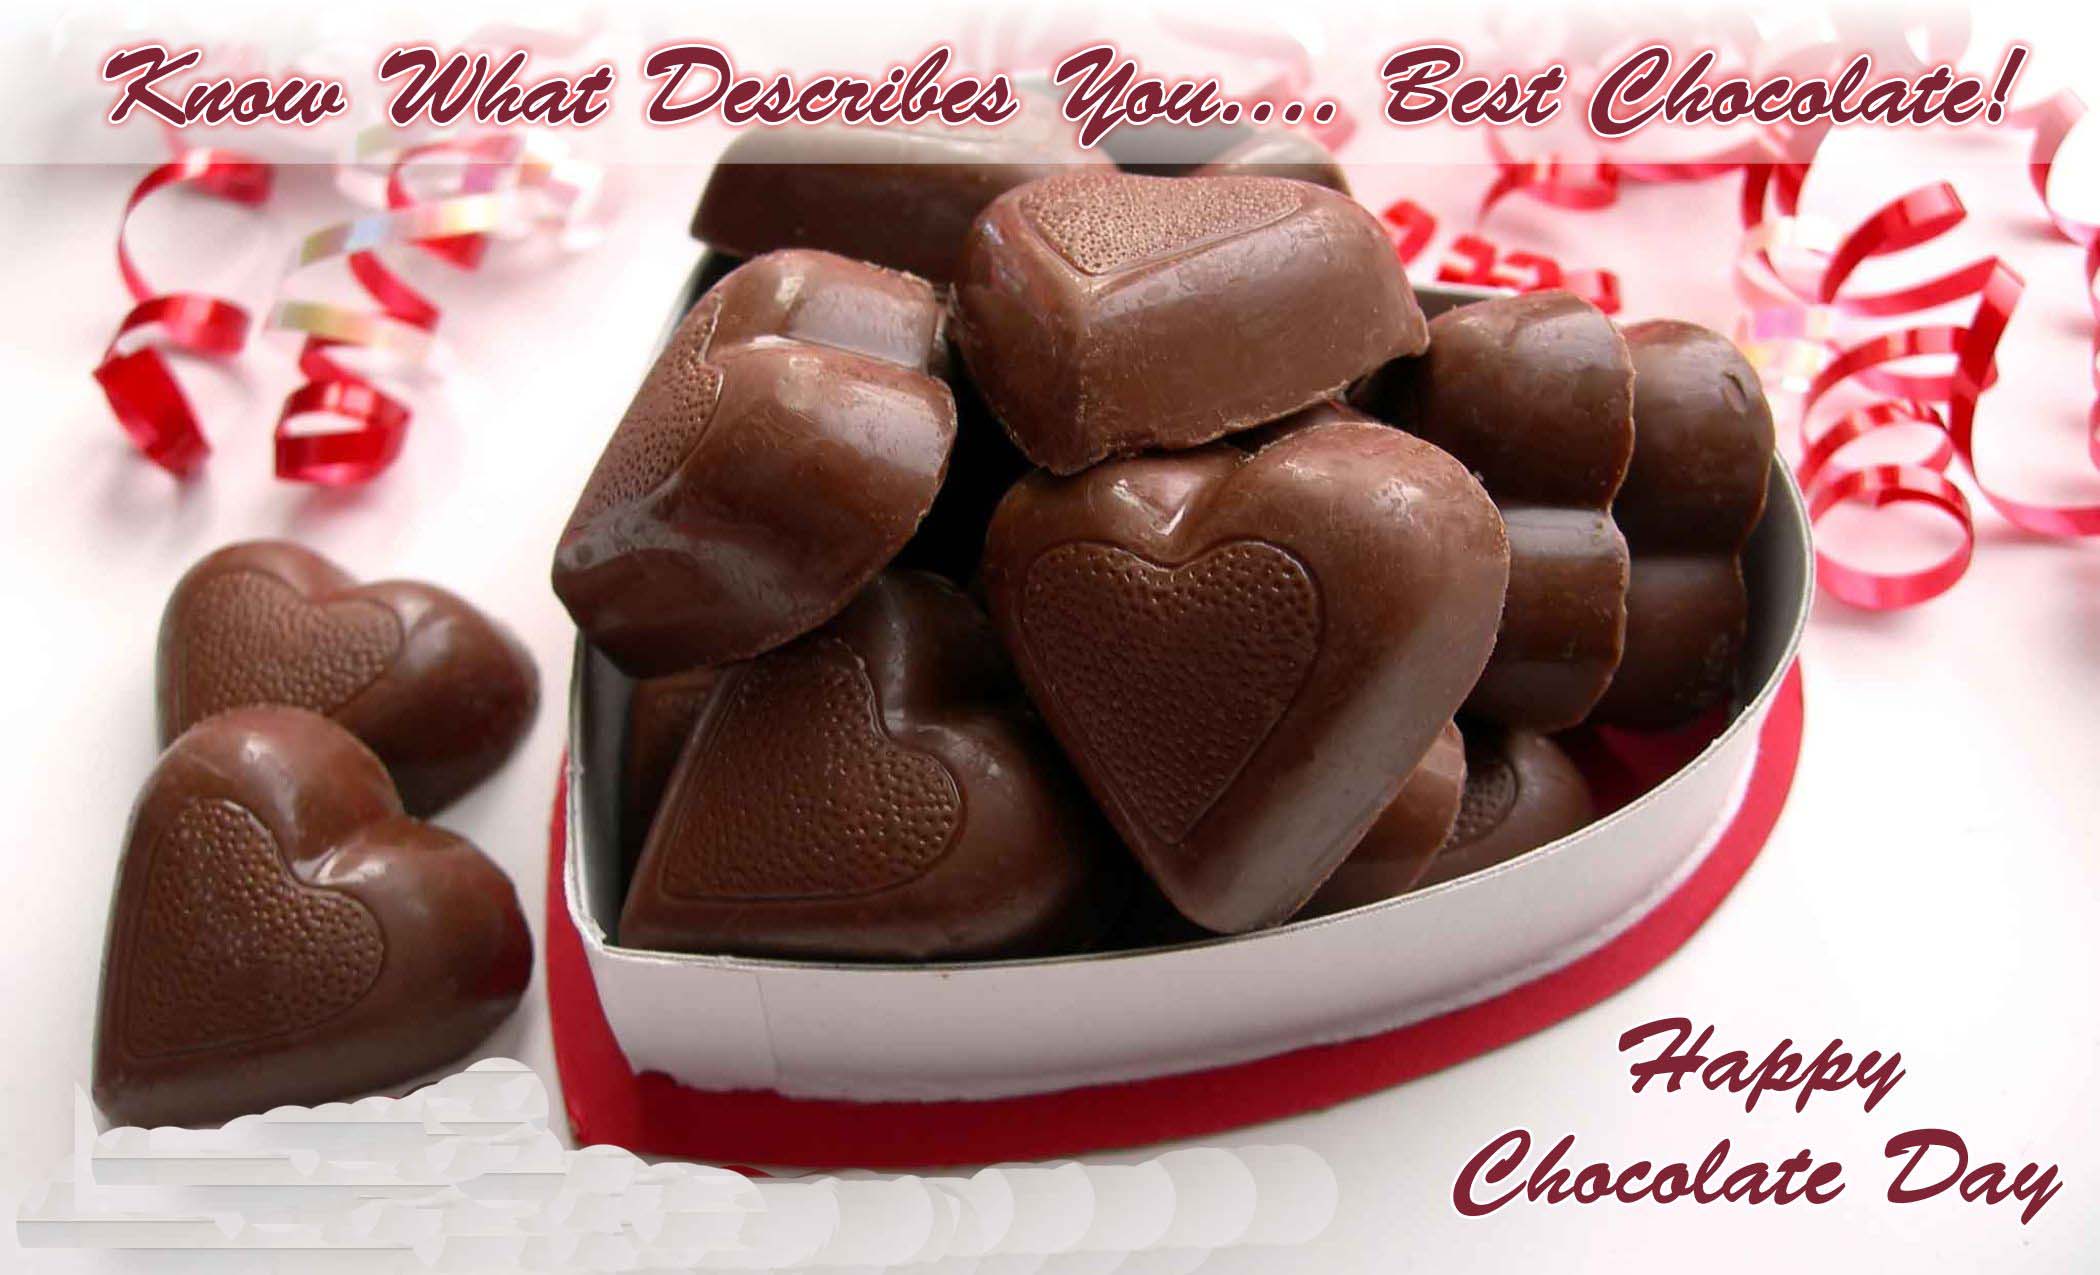 Download Chocolate Day Images For Whatsapp Dp Profile - Chocolat Saint Valentin Japon , HD Wallpaper & Backgrounds